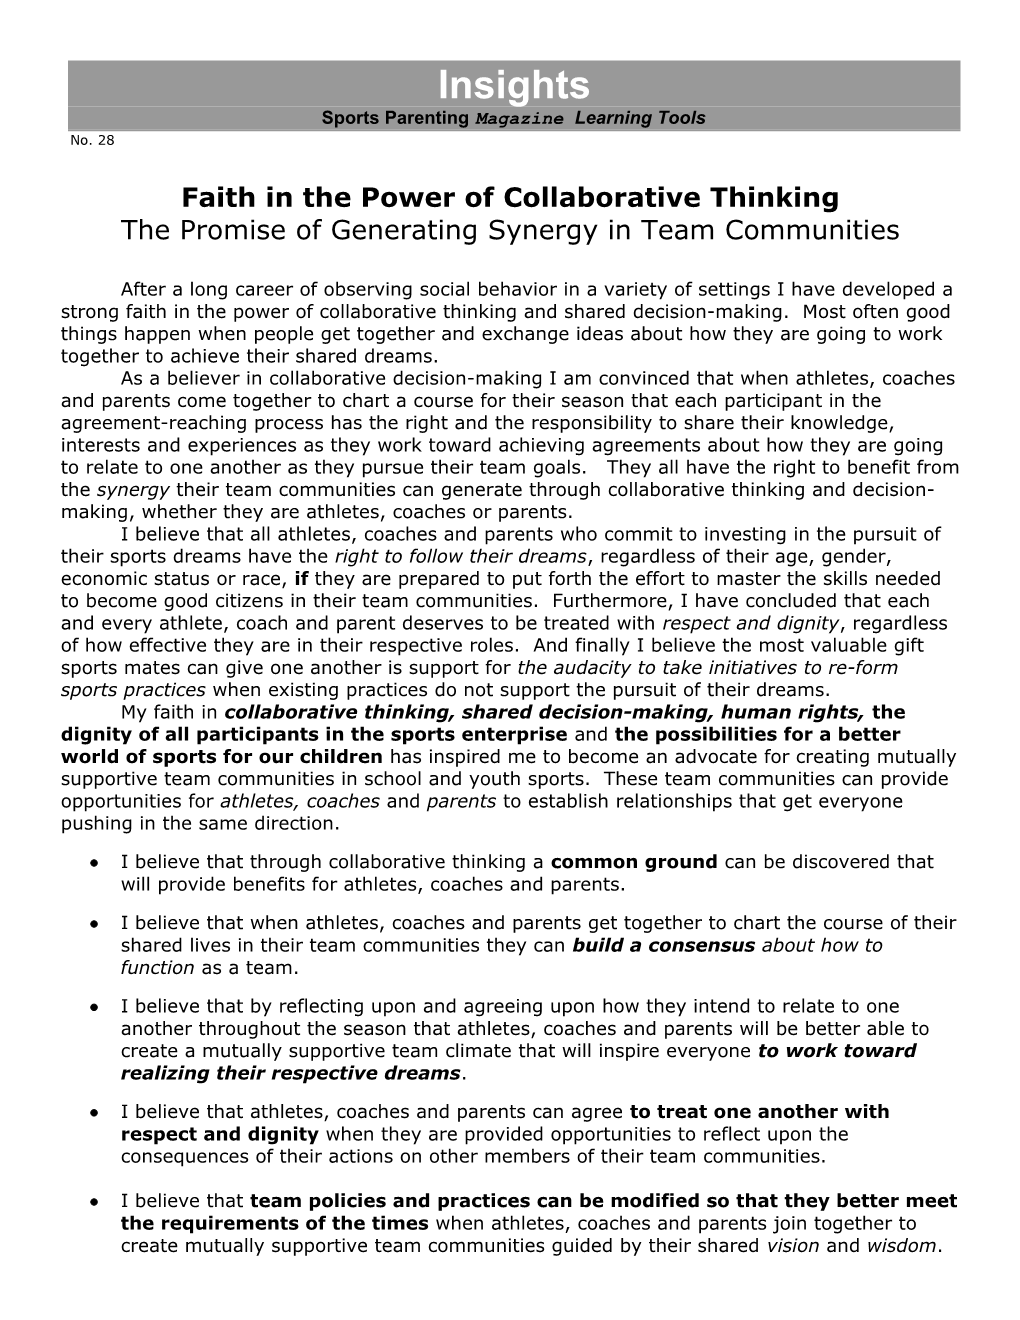 Faith in the Power of Collaborative Thinking